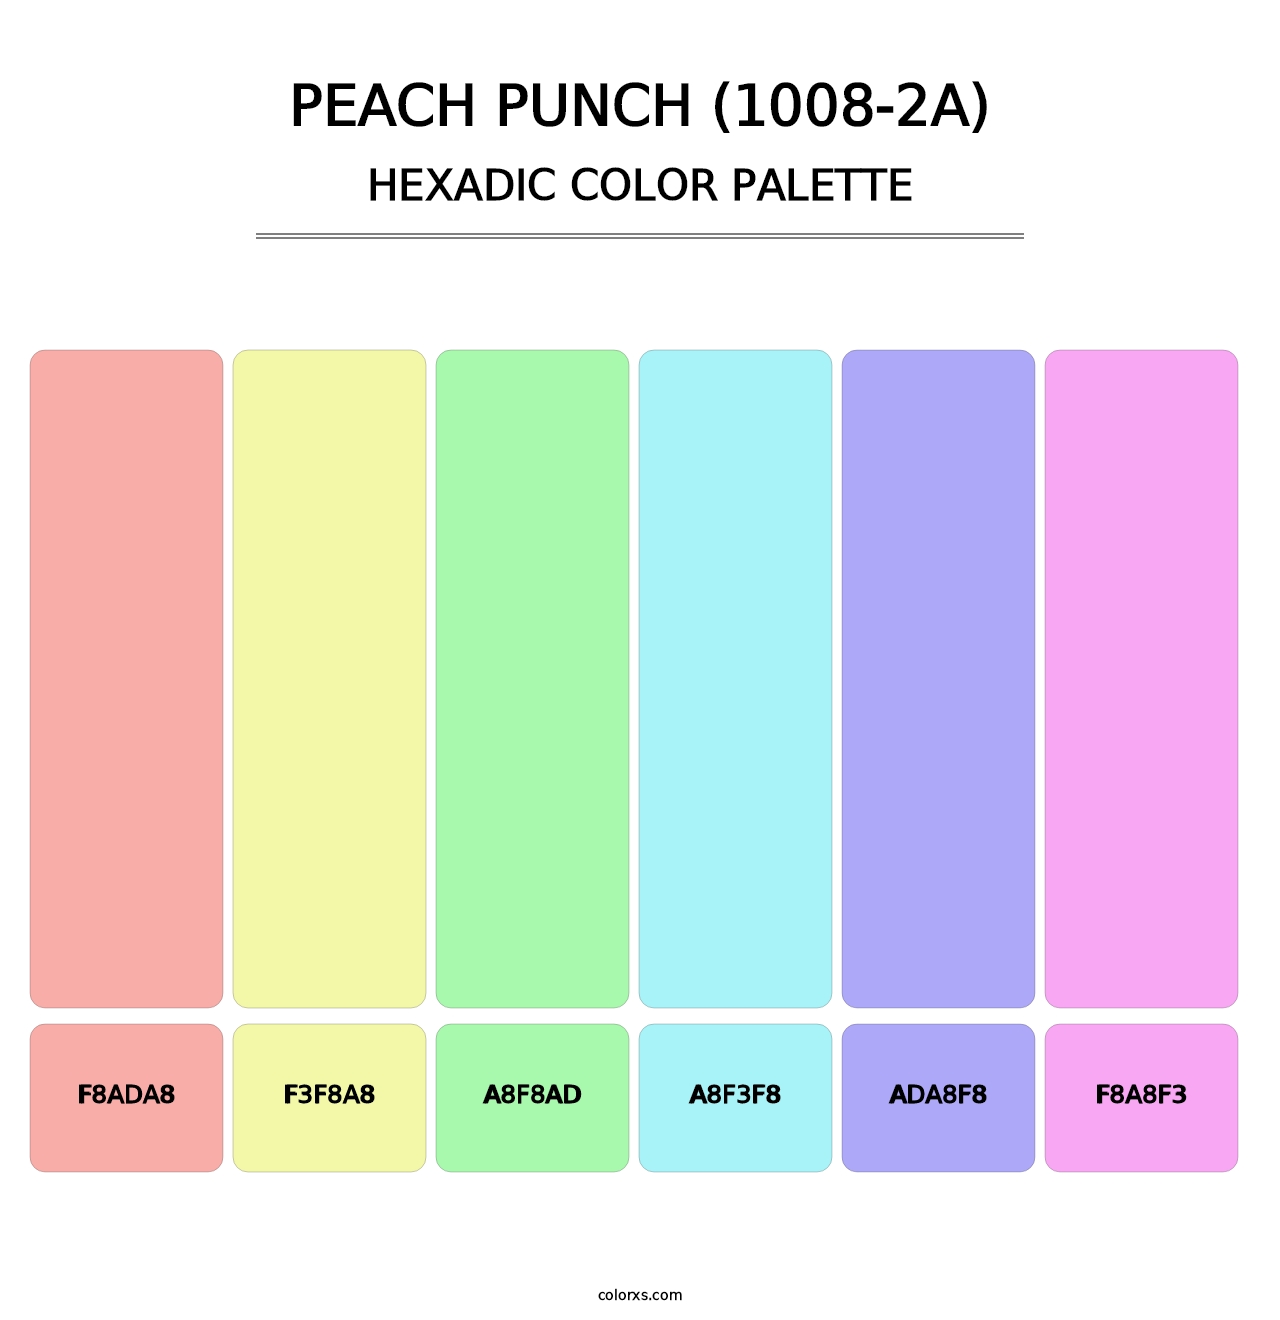 Peach Punch (1008-2A) - Hexadic Color Palette